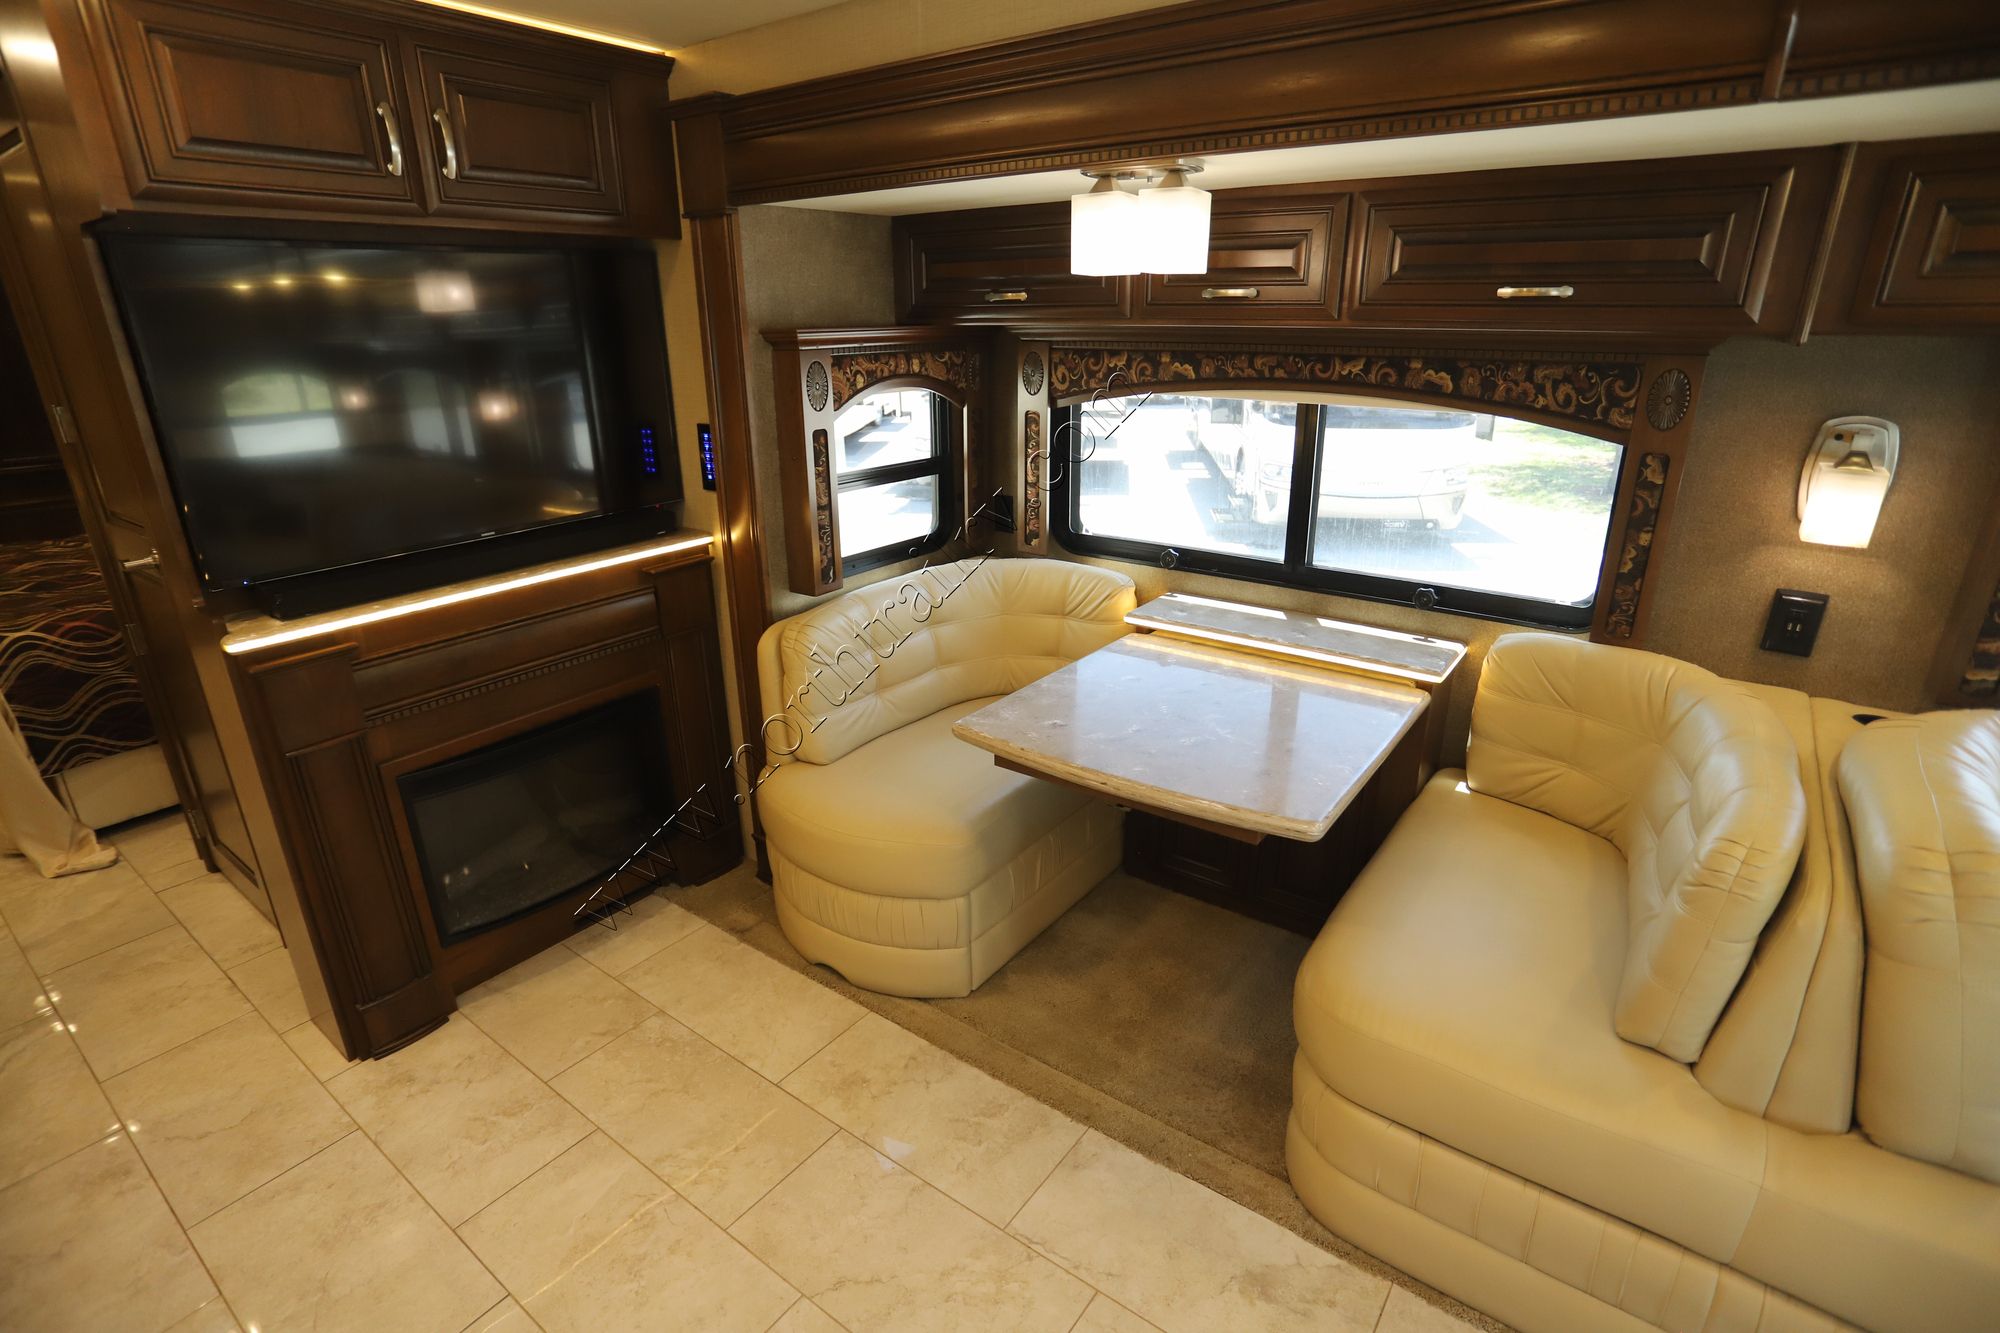 Used 2016 Entegra Anthem 42RBQ Class A  For Sale